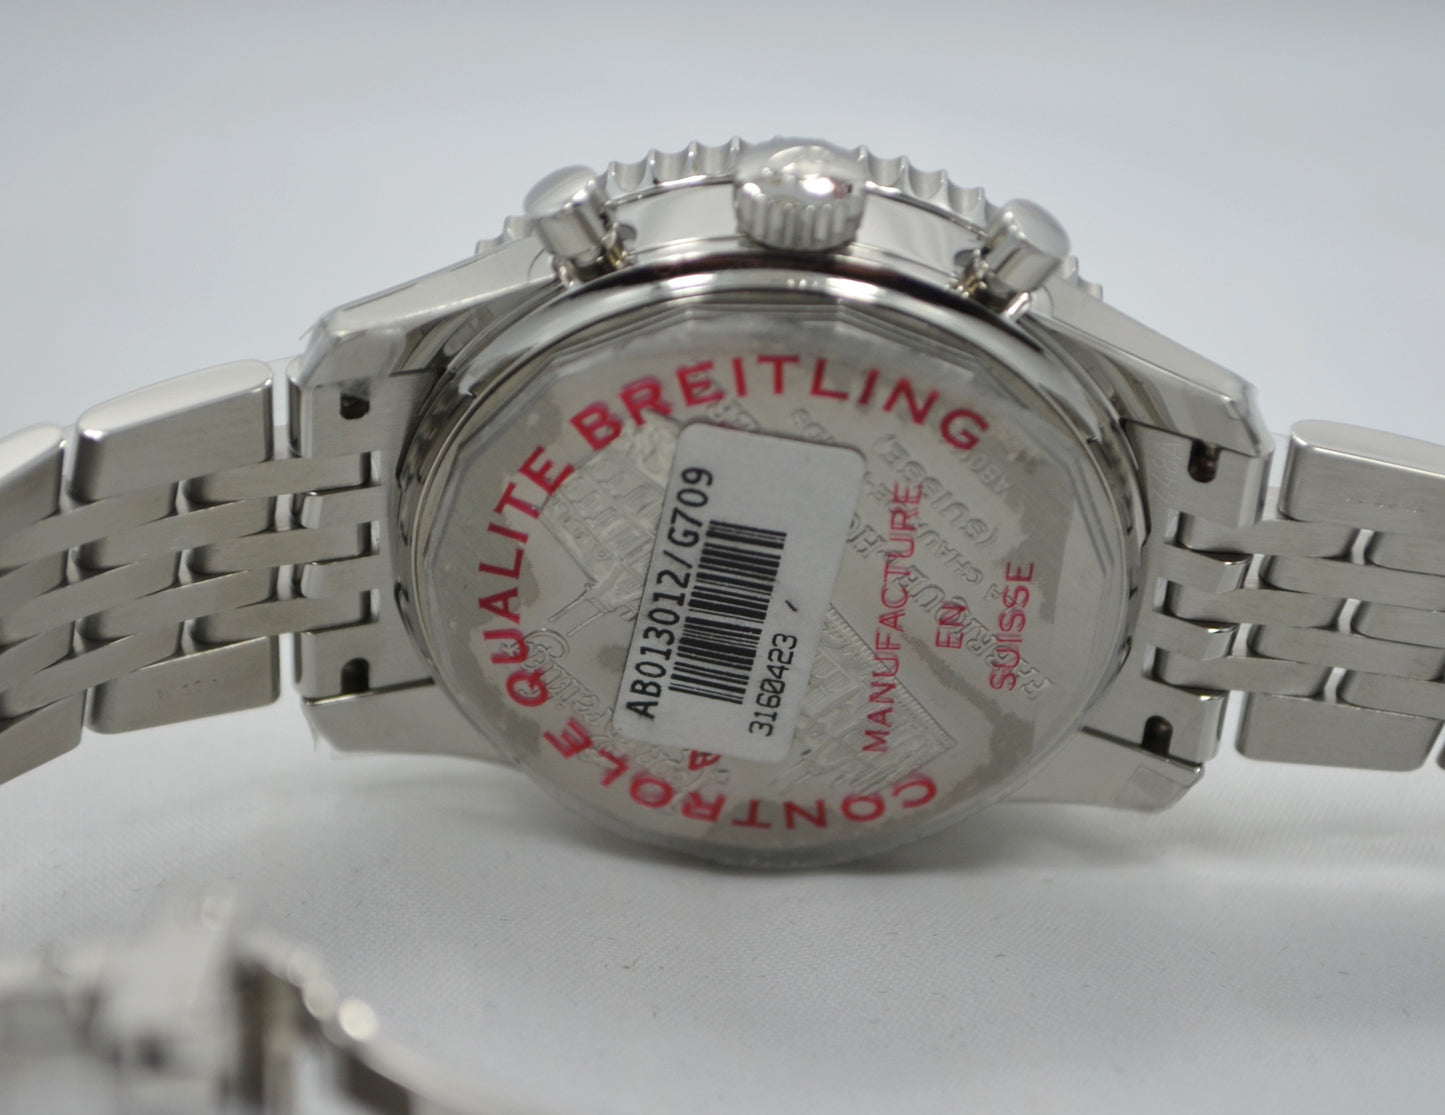 Breitling Montbrilliant 01 AB013012 Chronograph Steel Automatic Wristwatch - Hashtag Watch Company